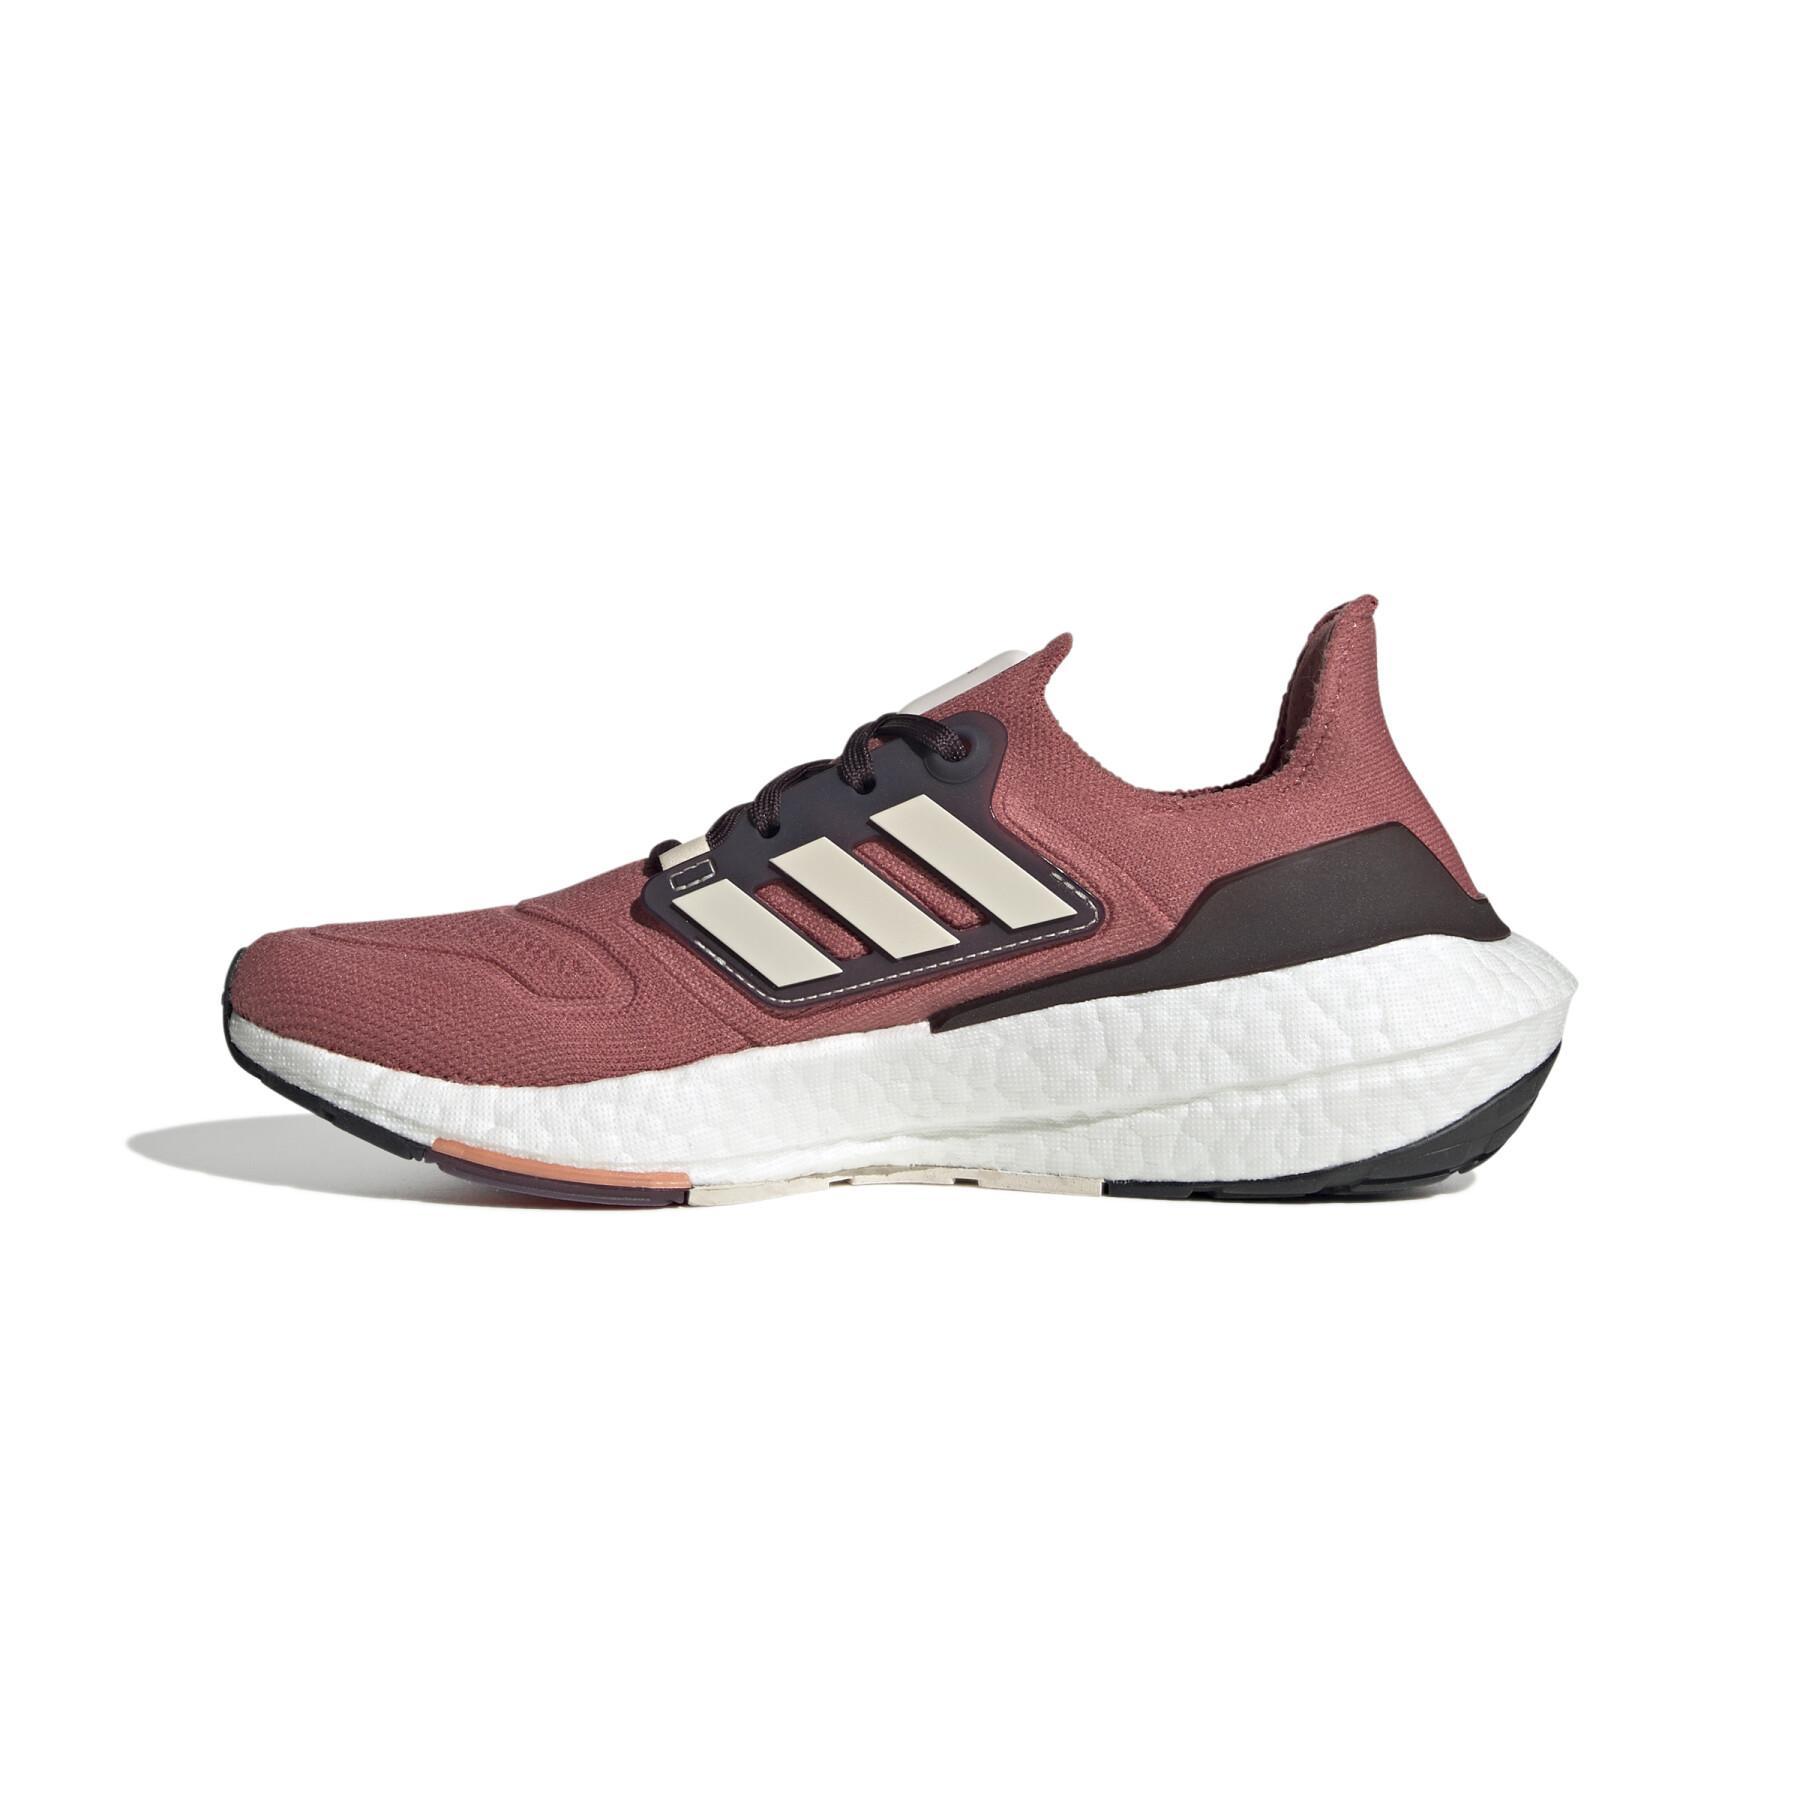 Shoes from running femme adidas Ultraboost